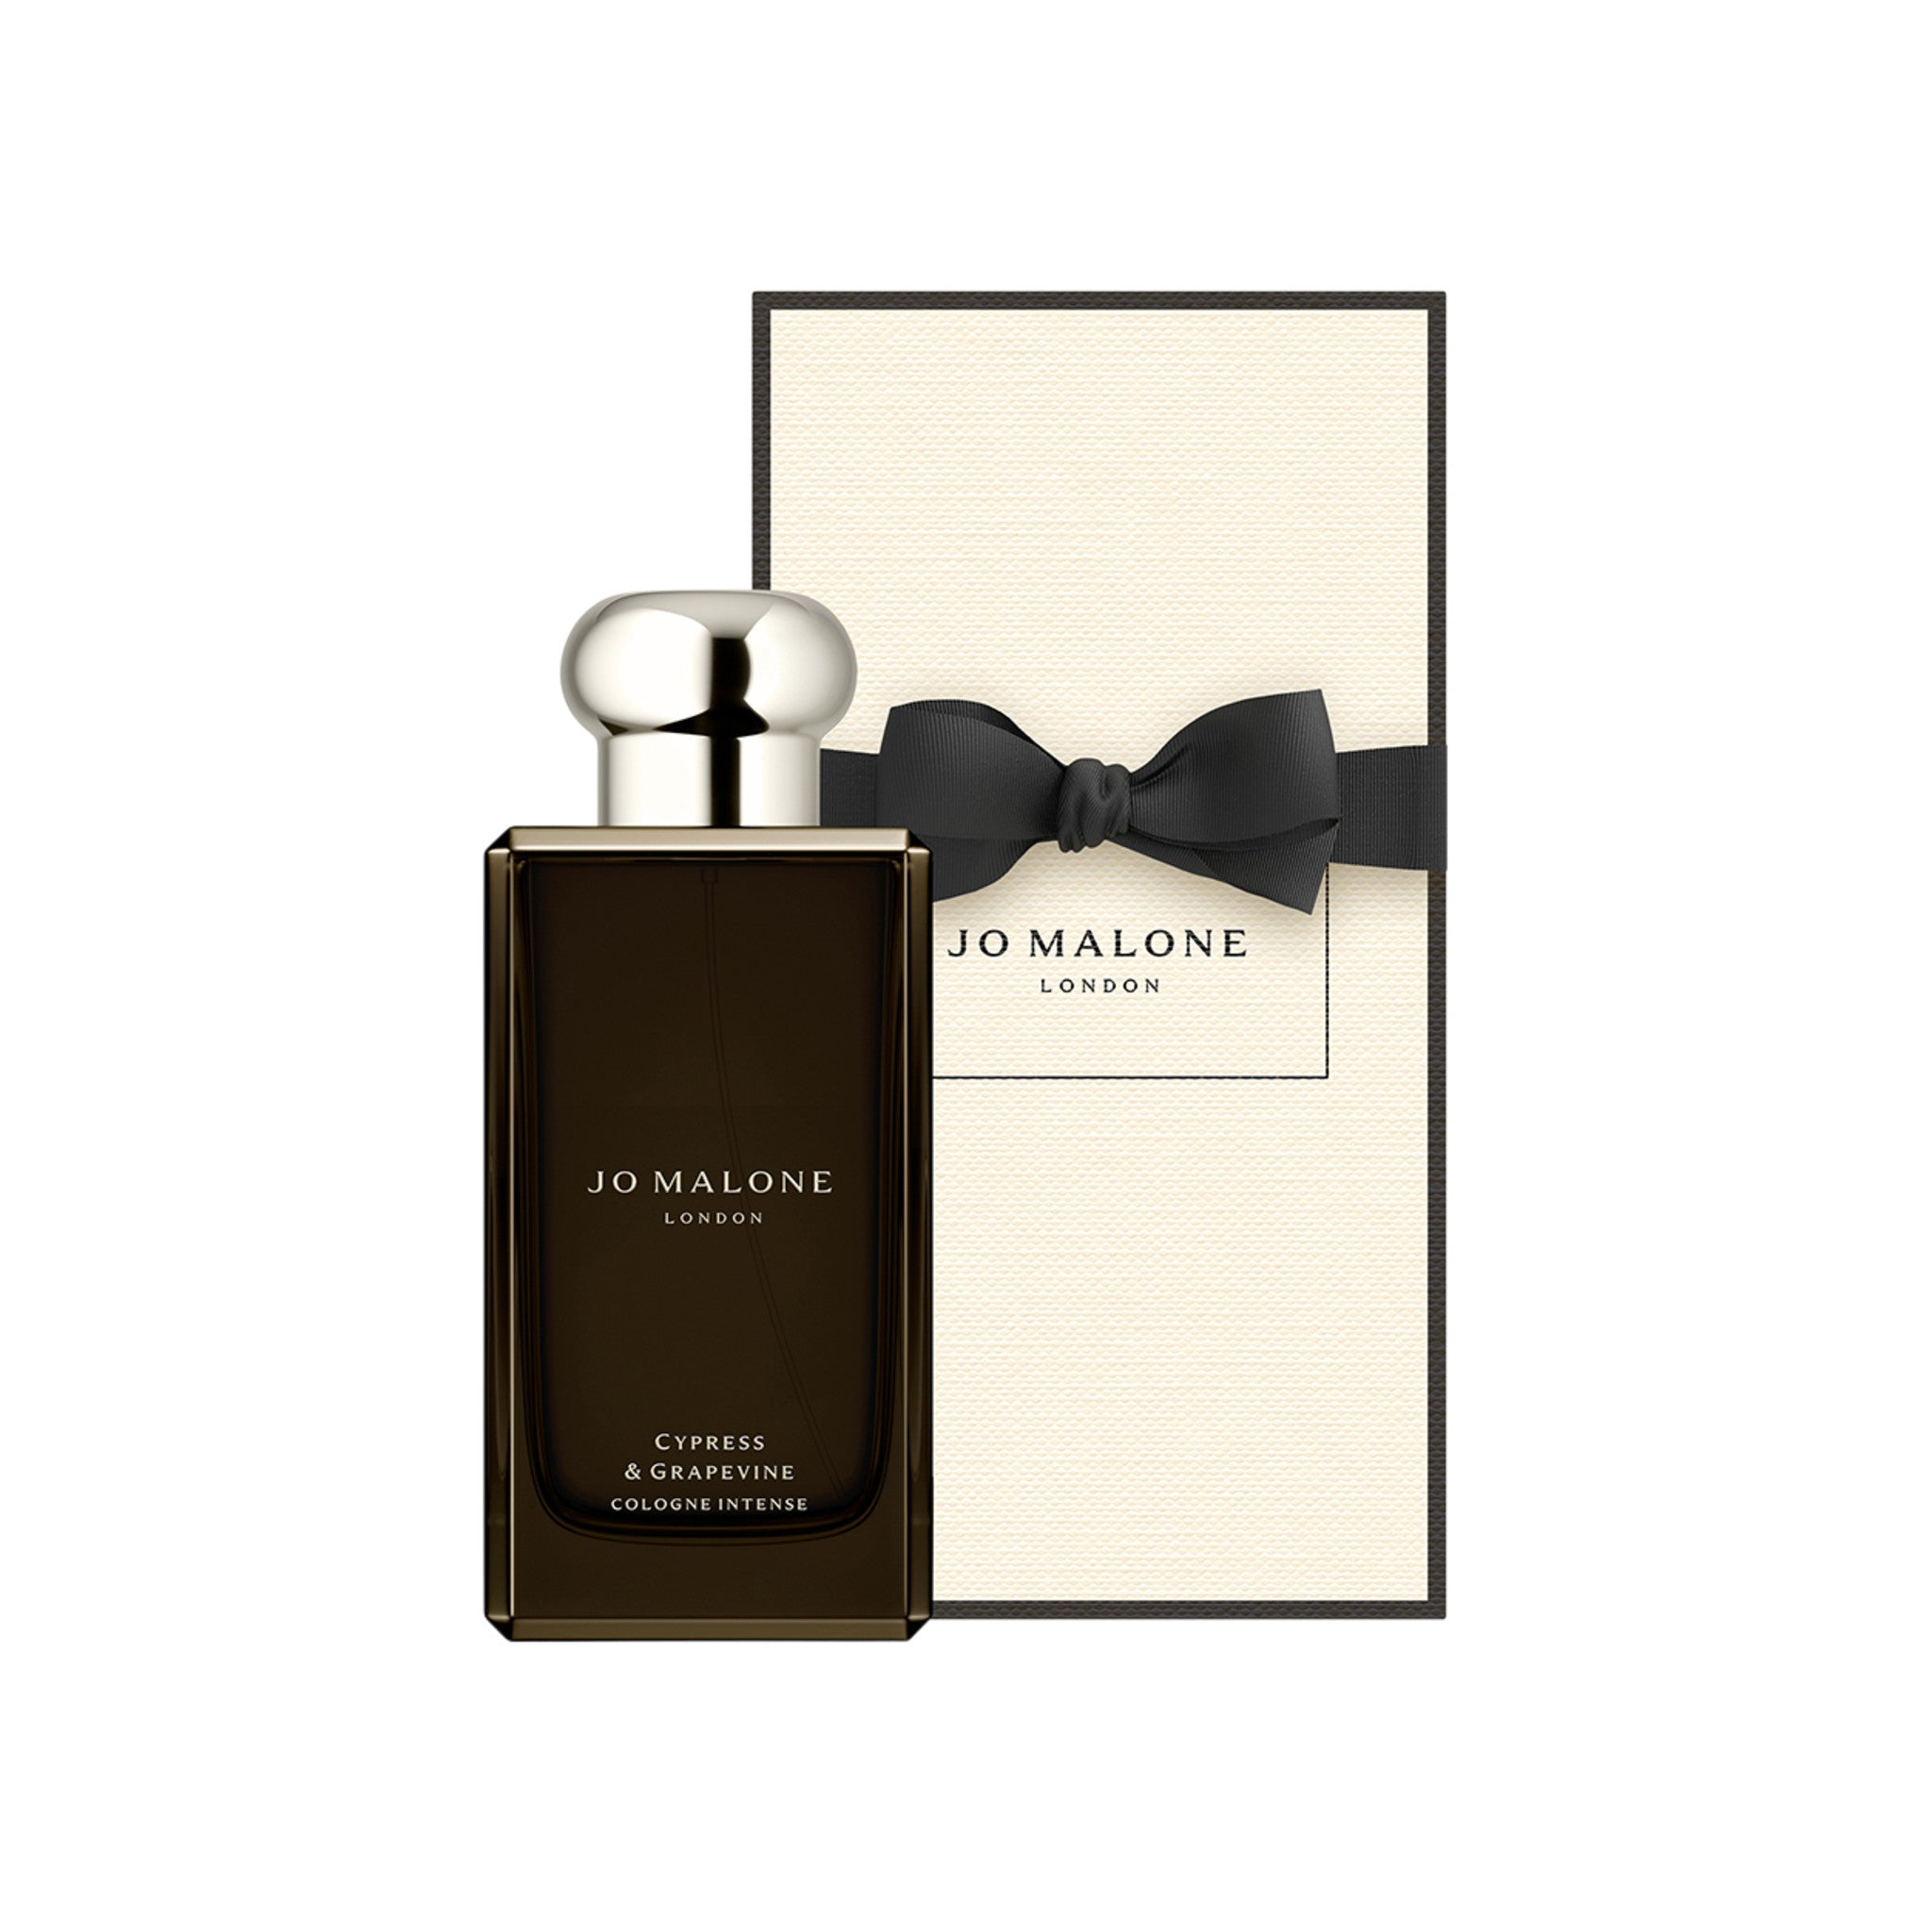 Jo Malone London Cypress and Grapevine Cologne Intense Size variant: 100 ml main image.